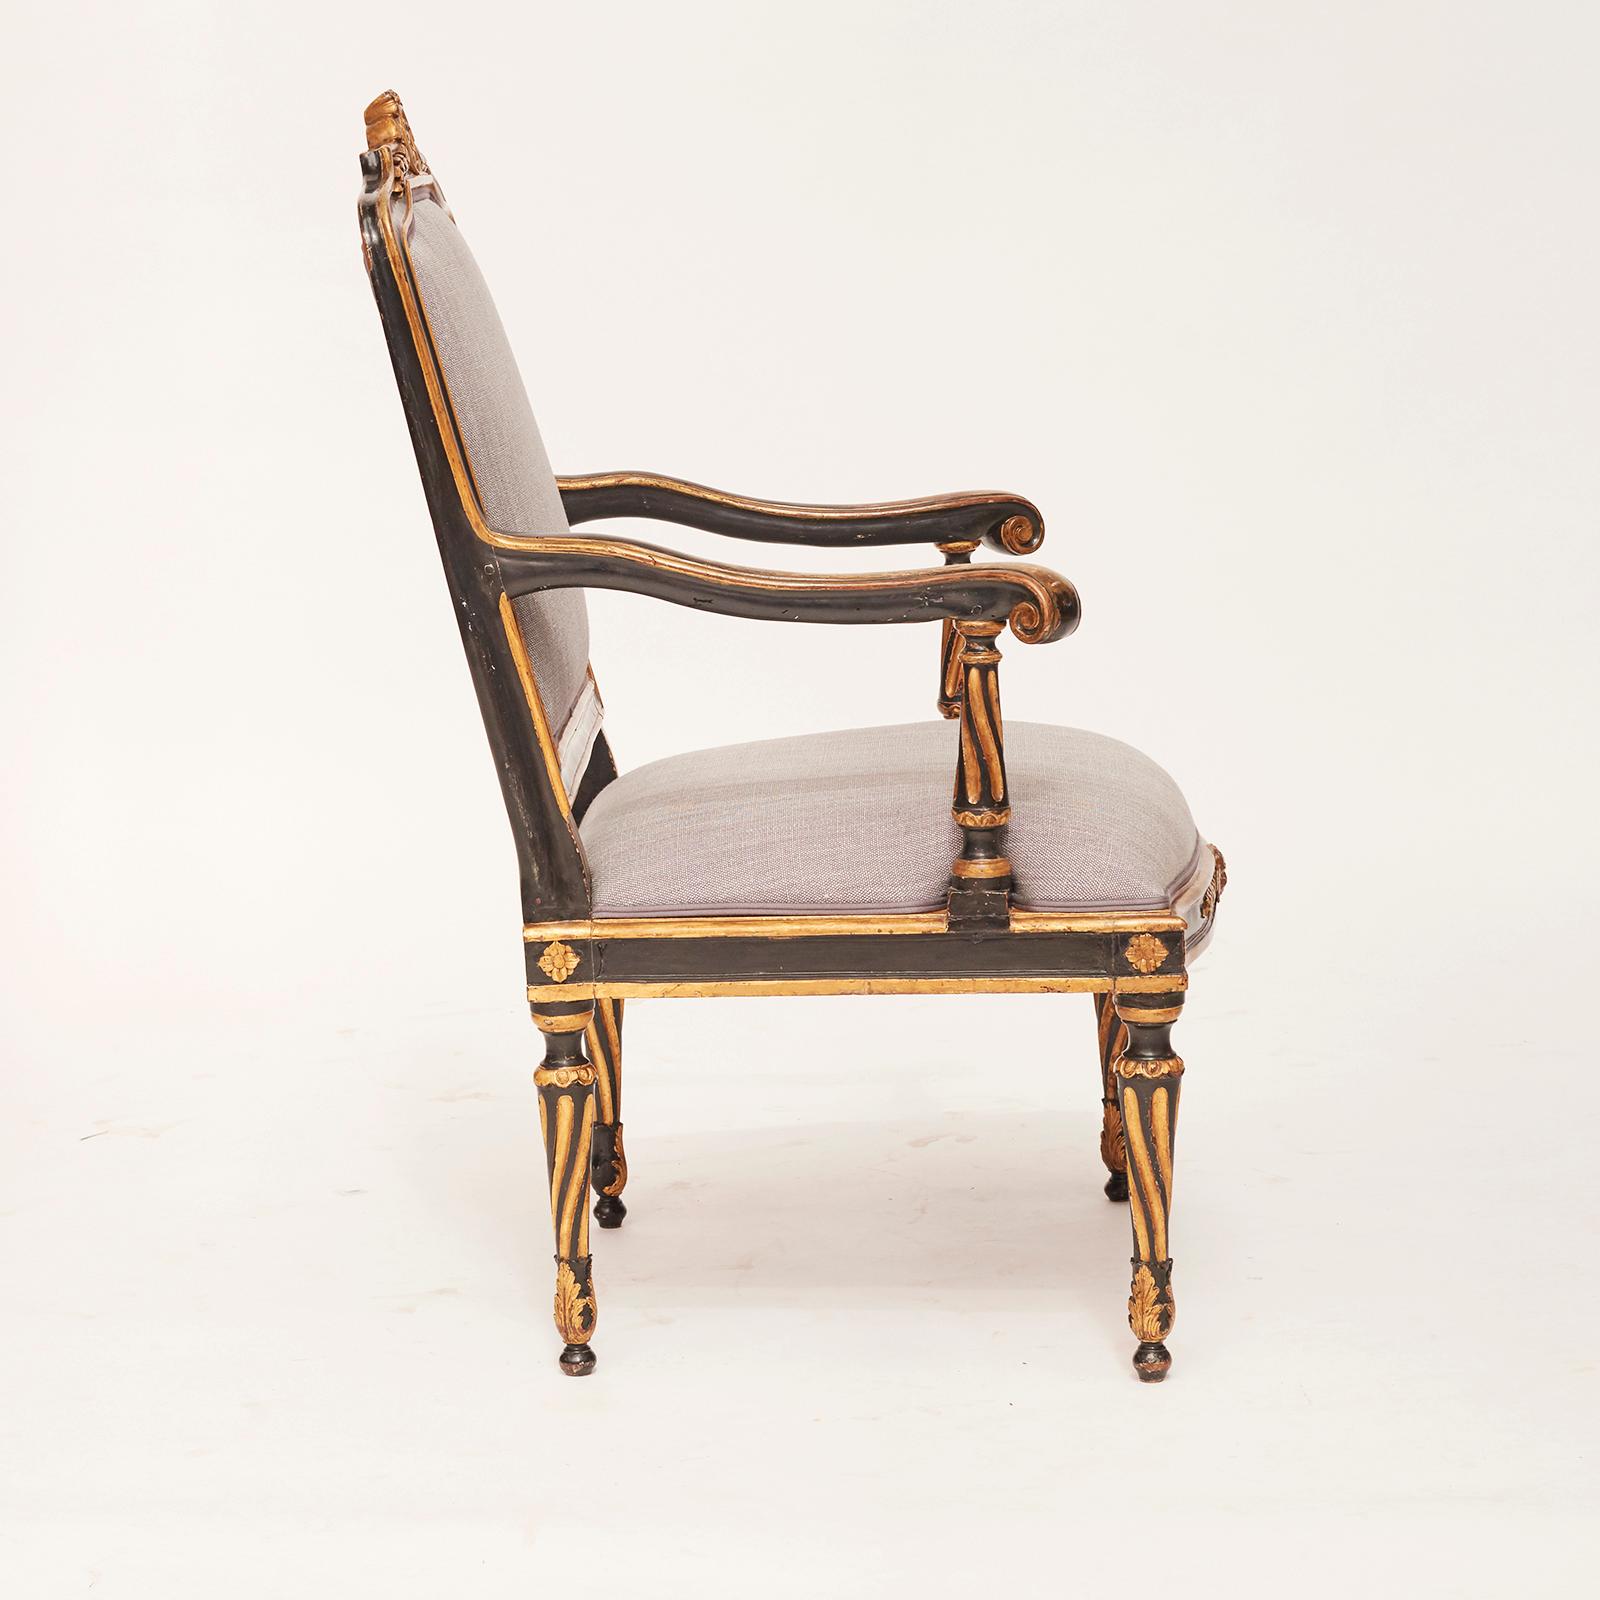 A Danish Louis XVI painted and parcel-gilt Fauteuil a La Reine, circa 1780s, of classic form with interesting twist carved fluting to the arm supports and legs.
New linen fabric by Colefax & Fowler.